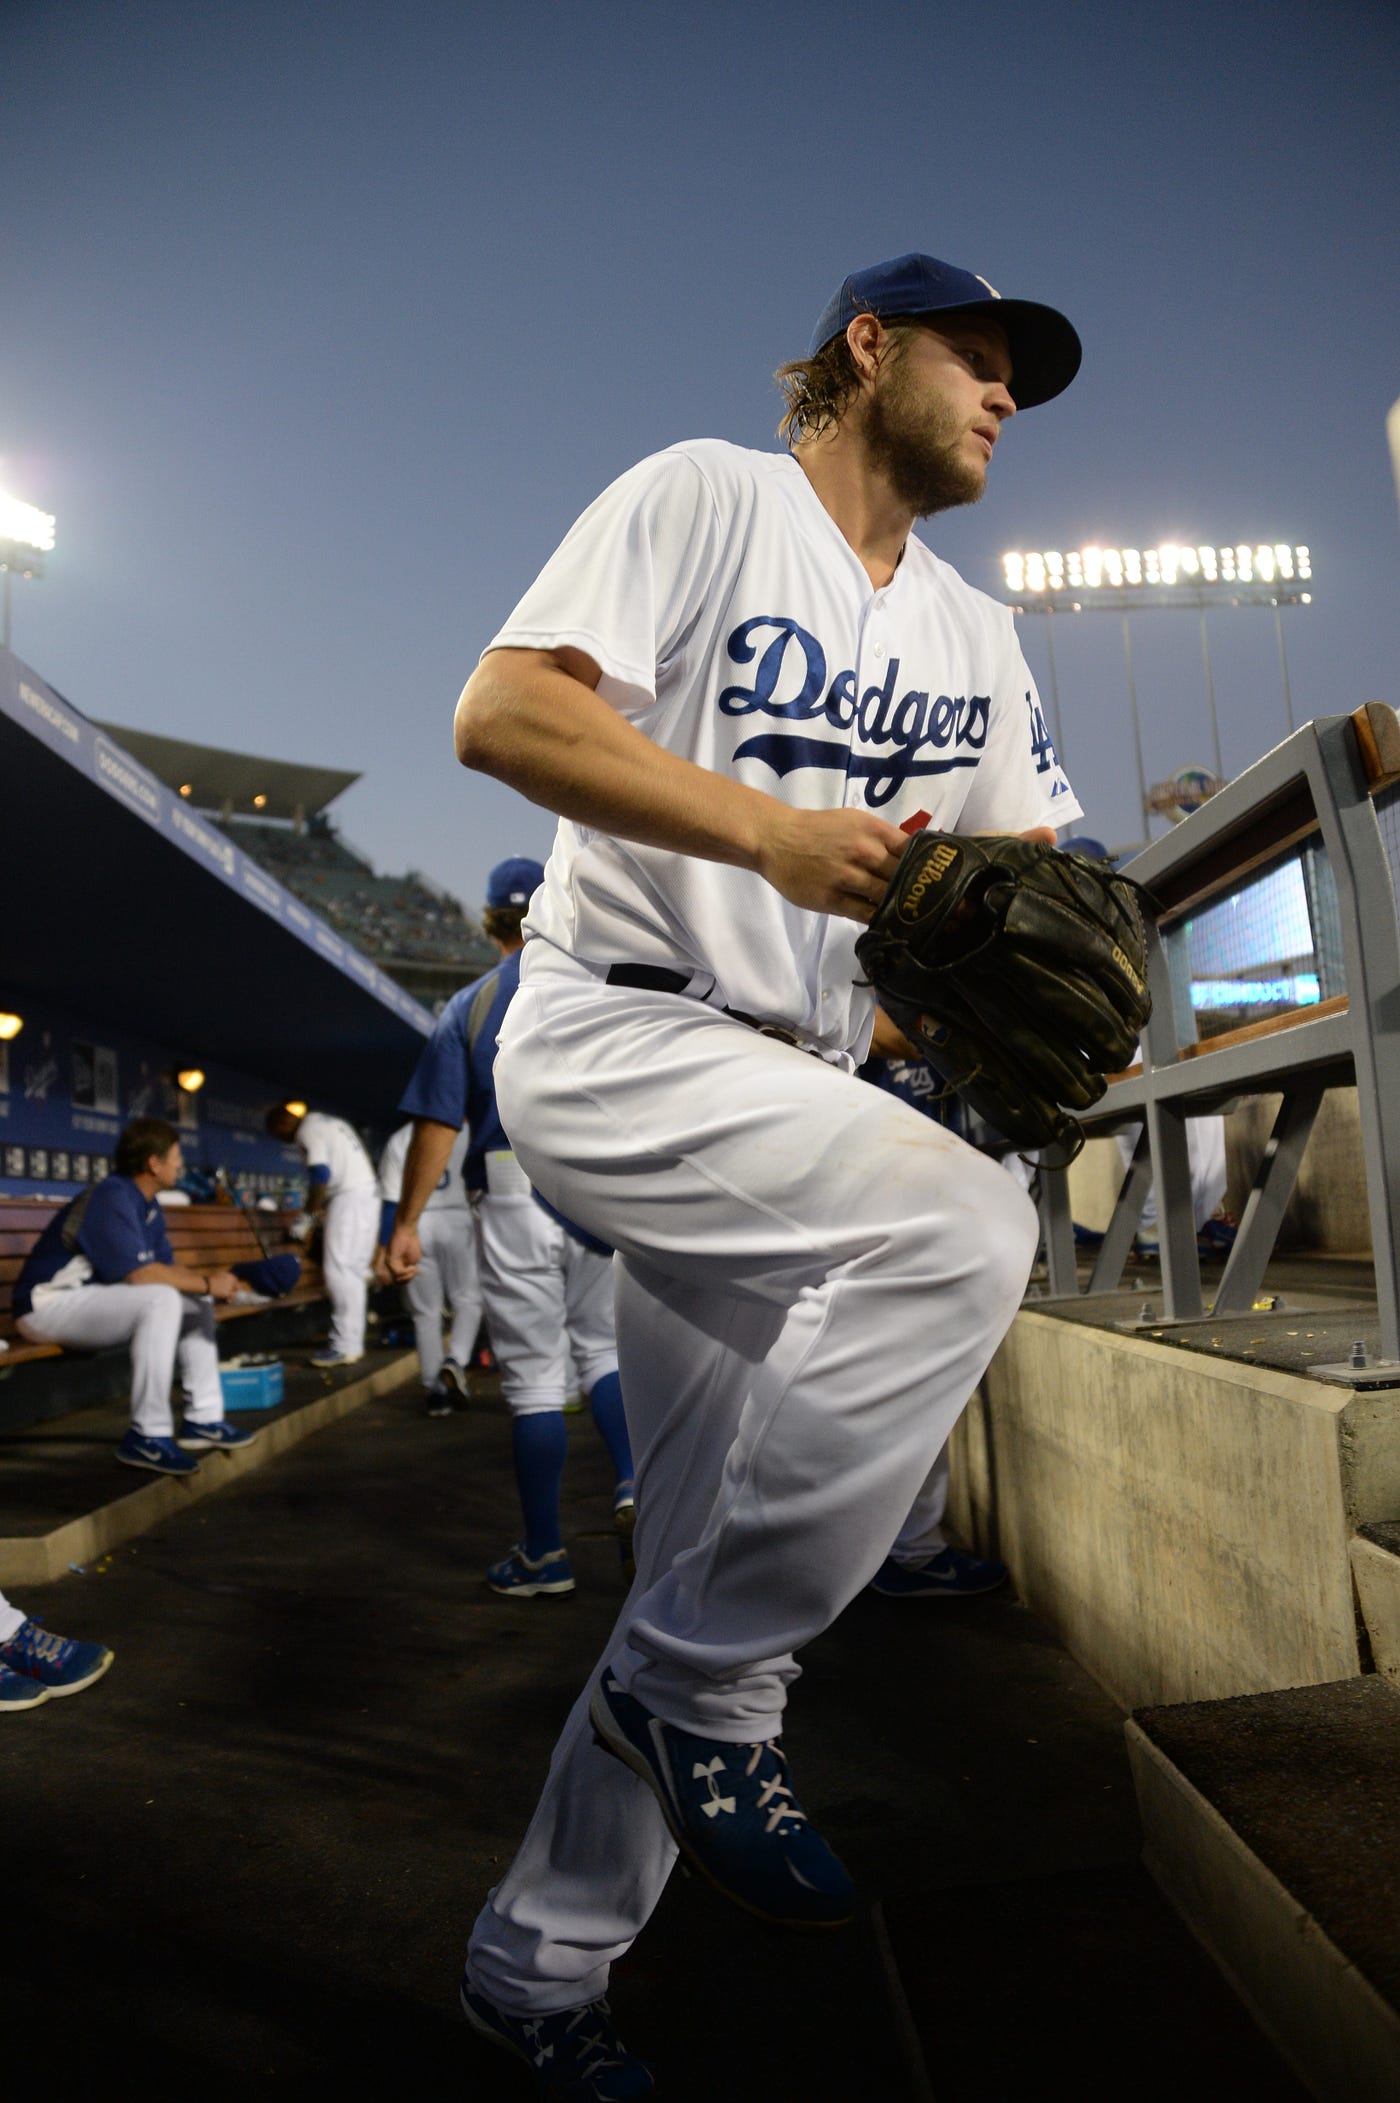 Dodgers' Clayton Kershaw Shares Never Before Heard Stories About